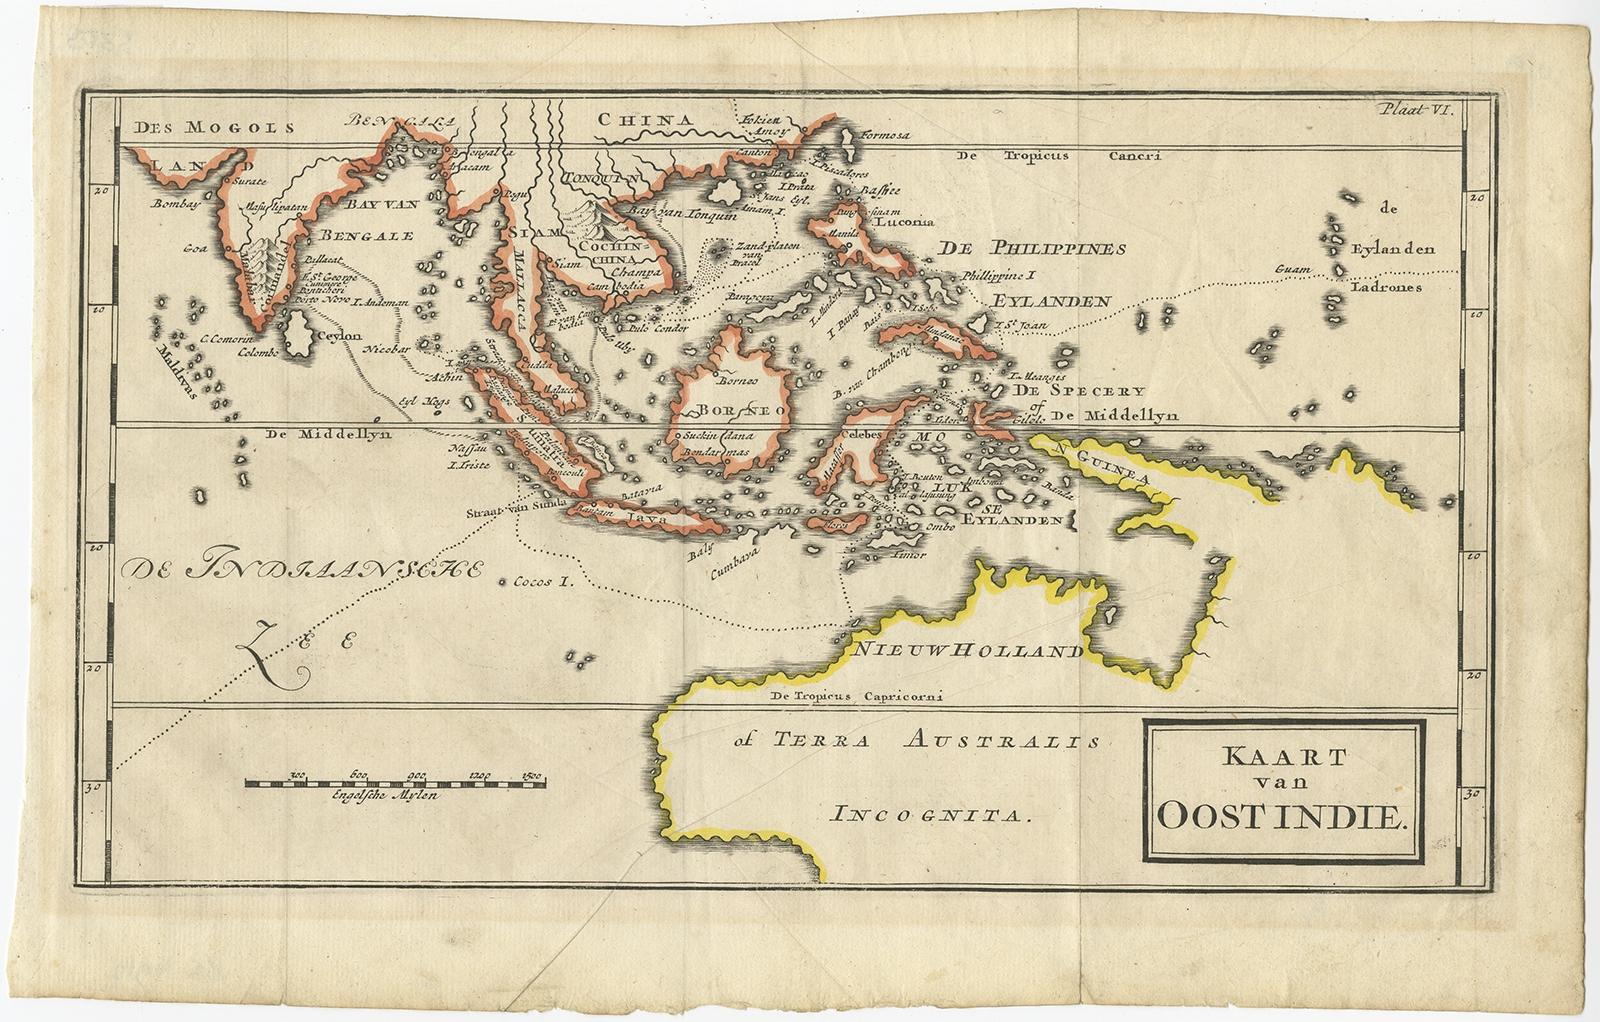 Antique map titled 'Kaart van Oost Indie'. 

Old map of the East Indies. It shows the routes of Captain William Dampier's voyage throughout the region. Dotted lines delineates explorations from Guam, through the East Indies, the Philippines,